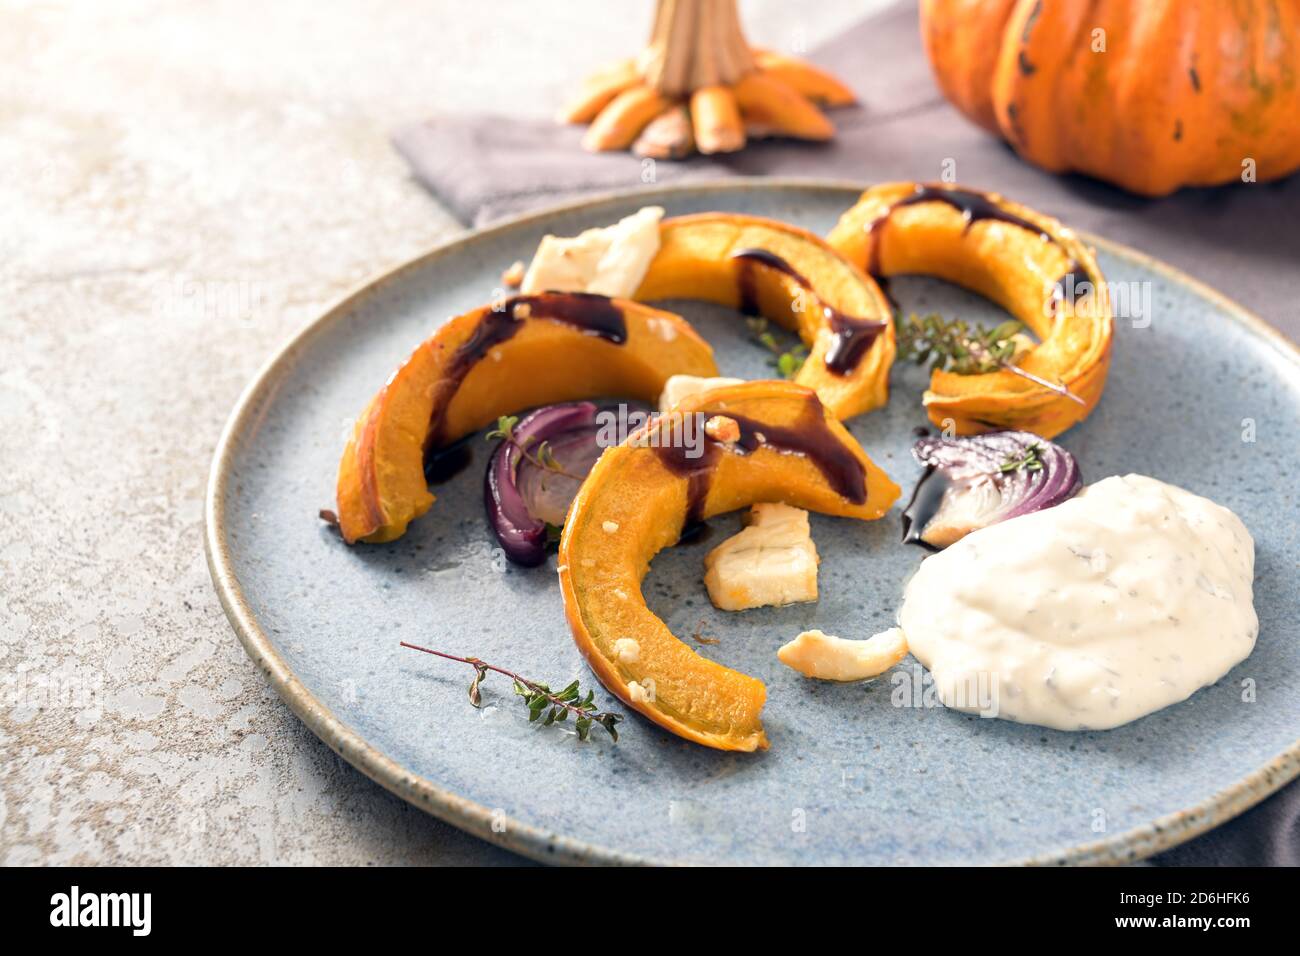 Pumpkin or squash wedges baked with red onions, feta cheese and thyme, also balsamic sauce and a sour cream dip on a gray blue plate, Thanksgiving or Stock Photo